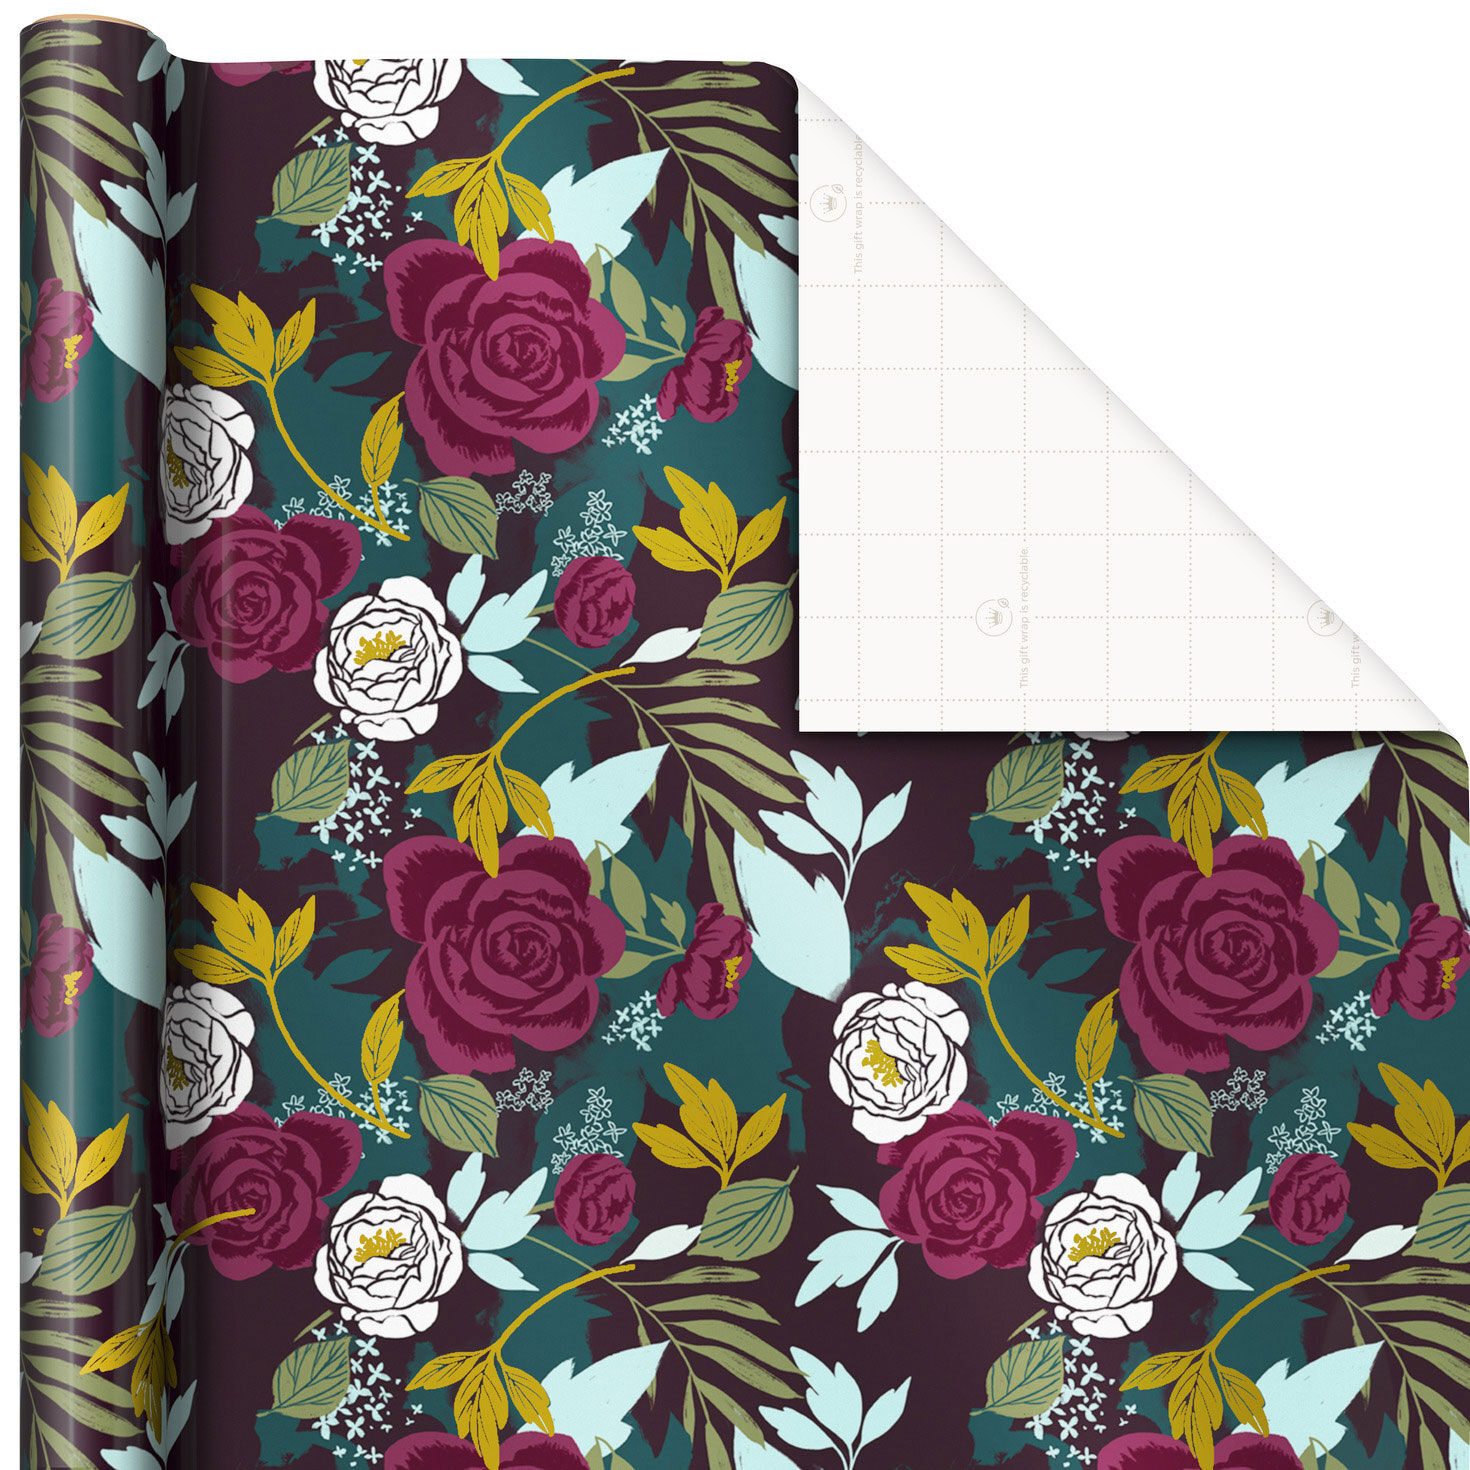 Bold Floral on Teal Wrapping Paper, 20 sq. ft. for only USD 4.99 | Hallmark